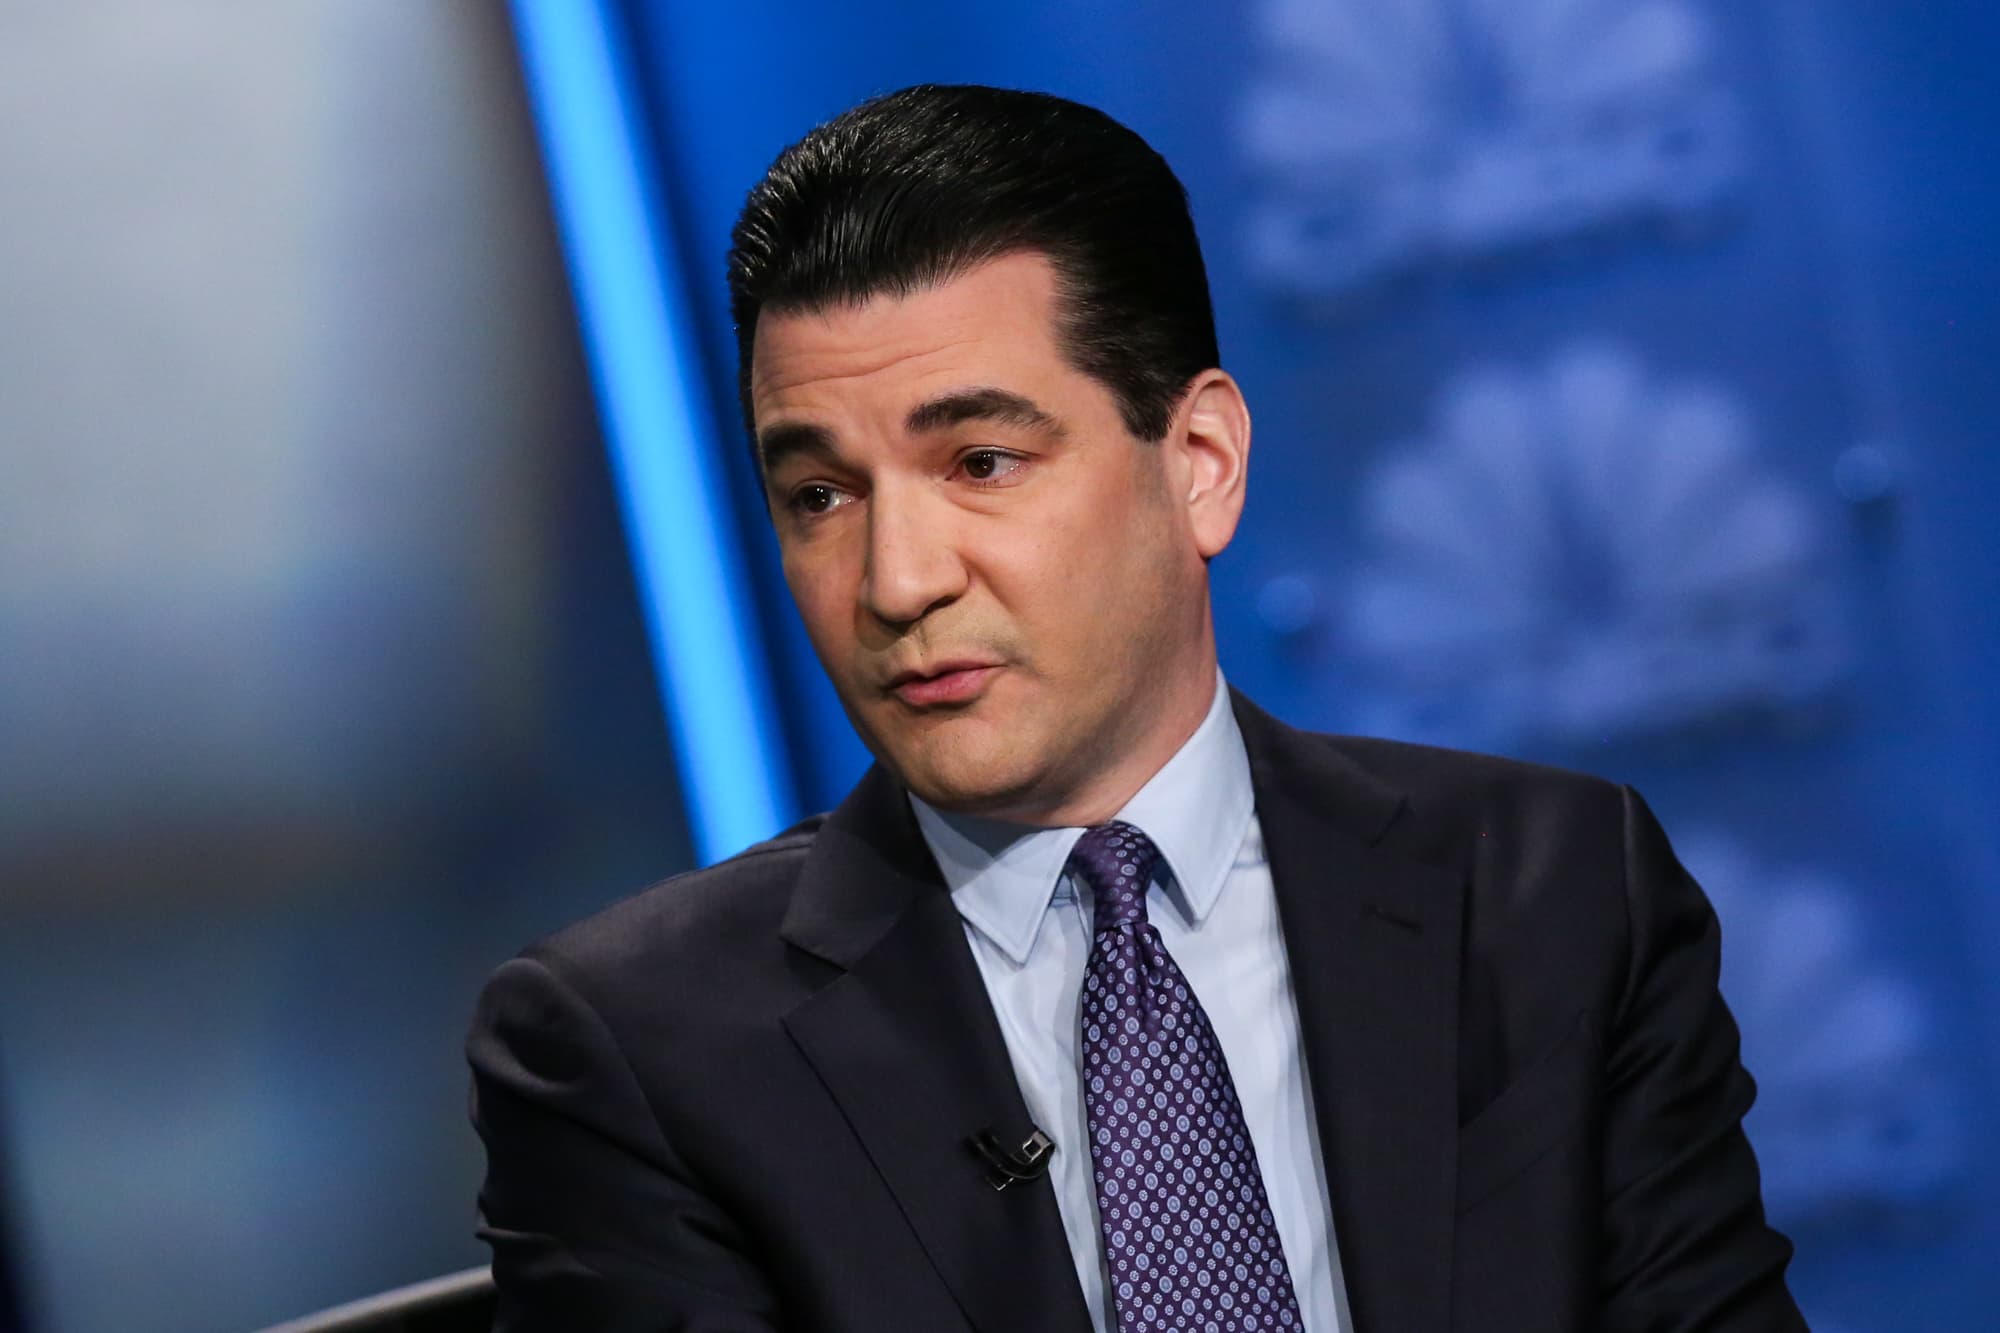 U.S. potentially facing ‘perpetual infection’ of Covid, says Gottlieb